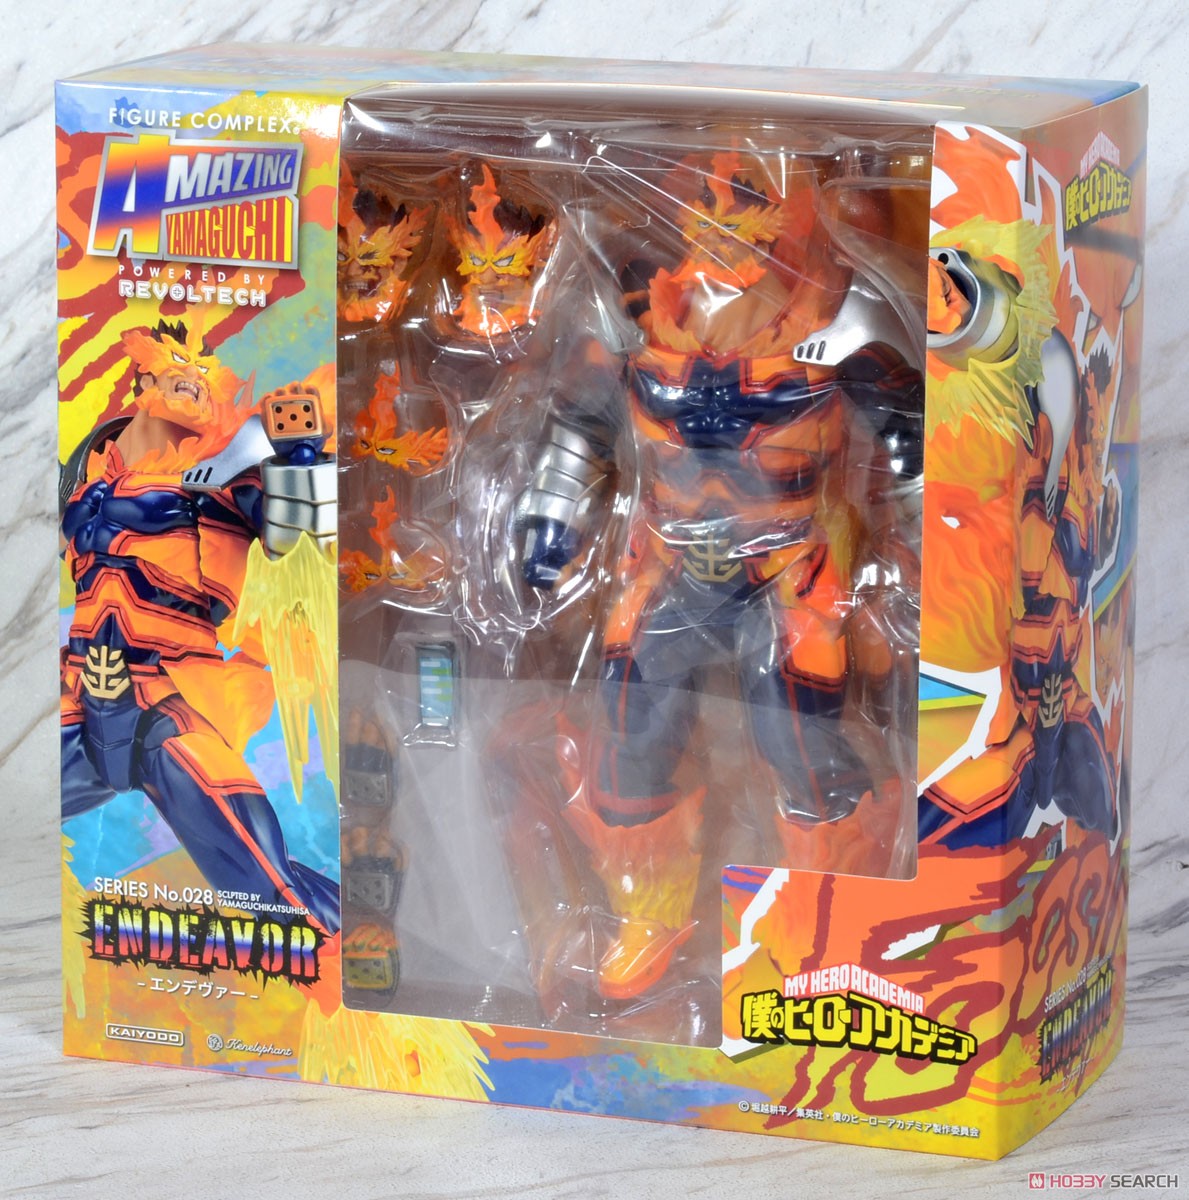 Figure Complex Amazing Yamaguchi Series No.028 [Endeavor] (Completed) Package1